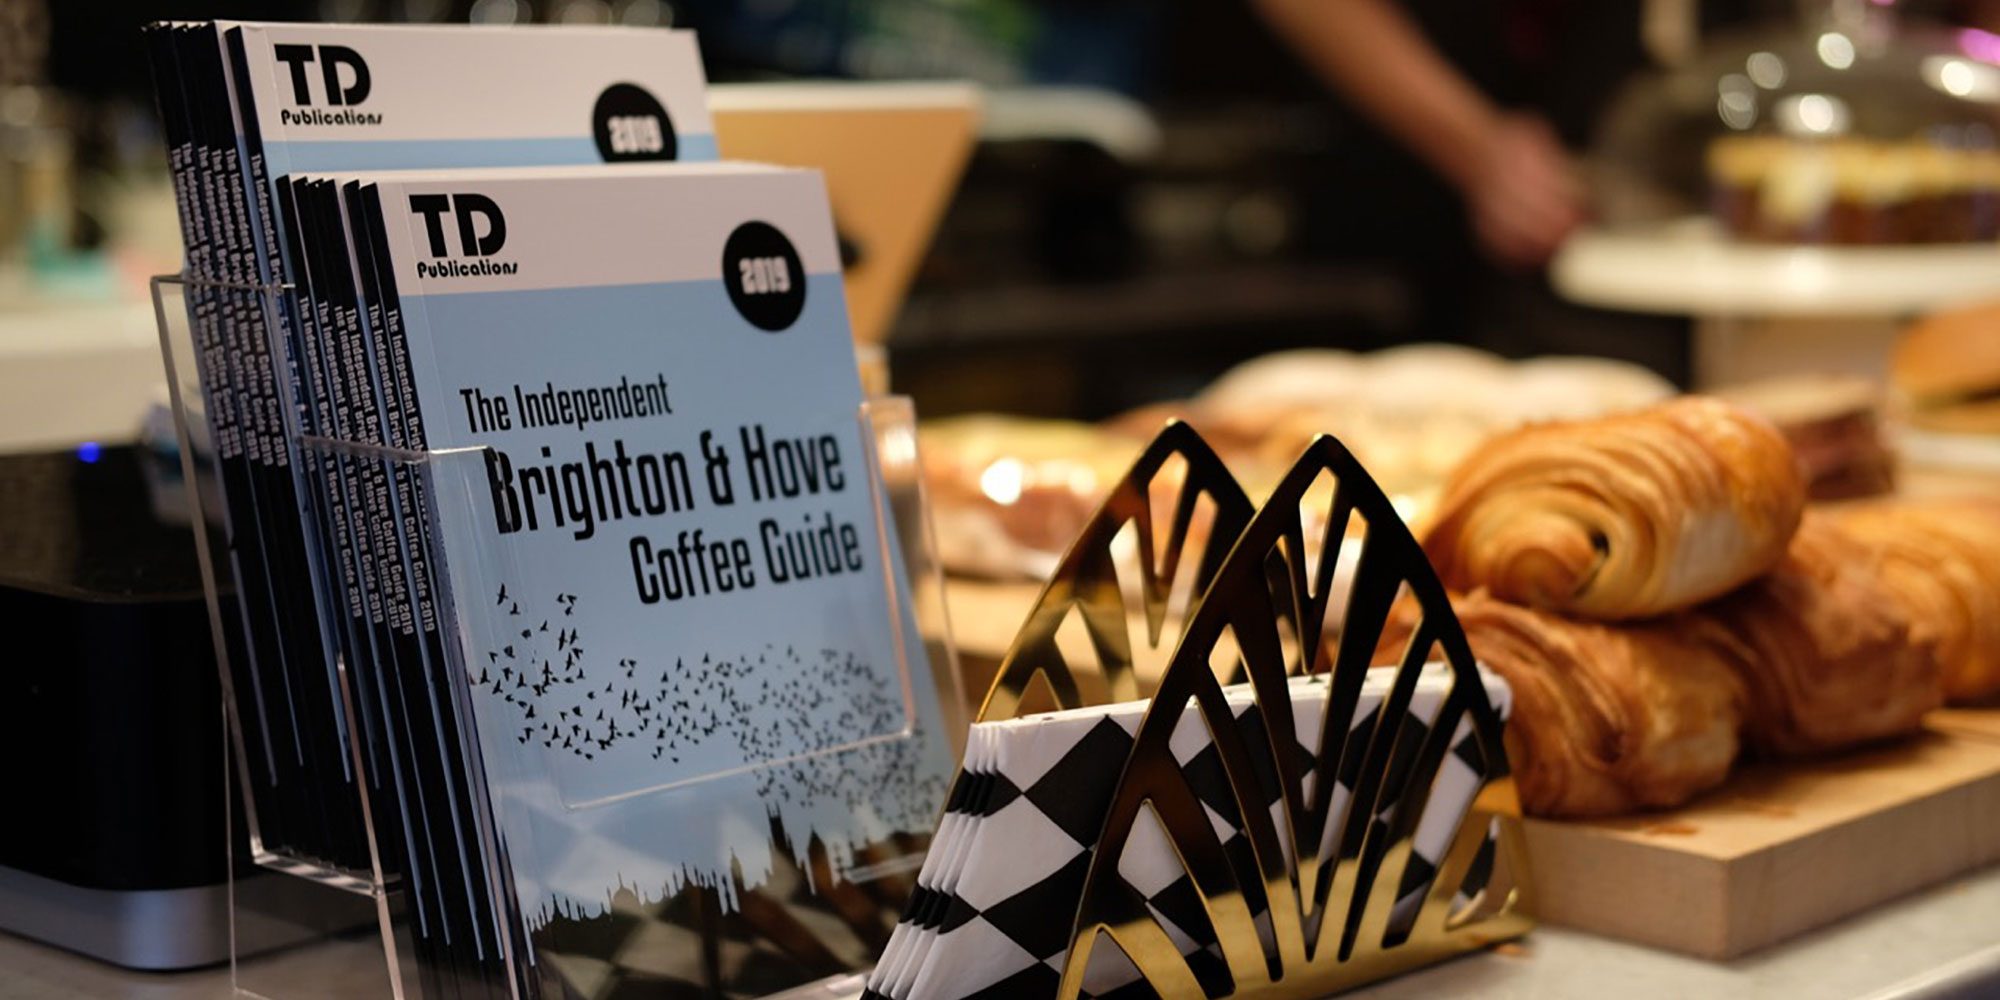 The Independent Brighton & Hove Coffee Guide